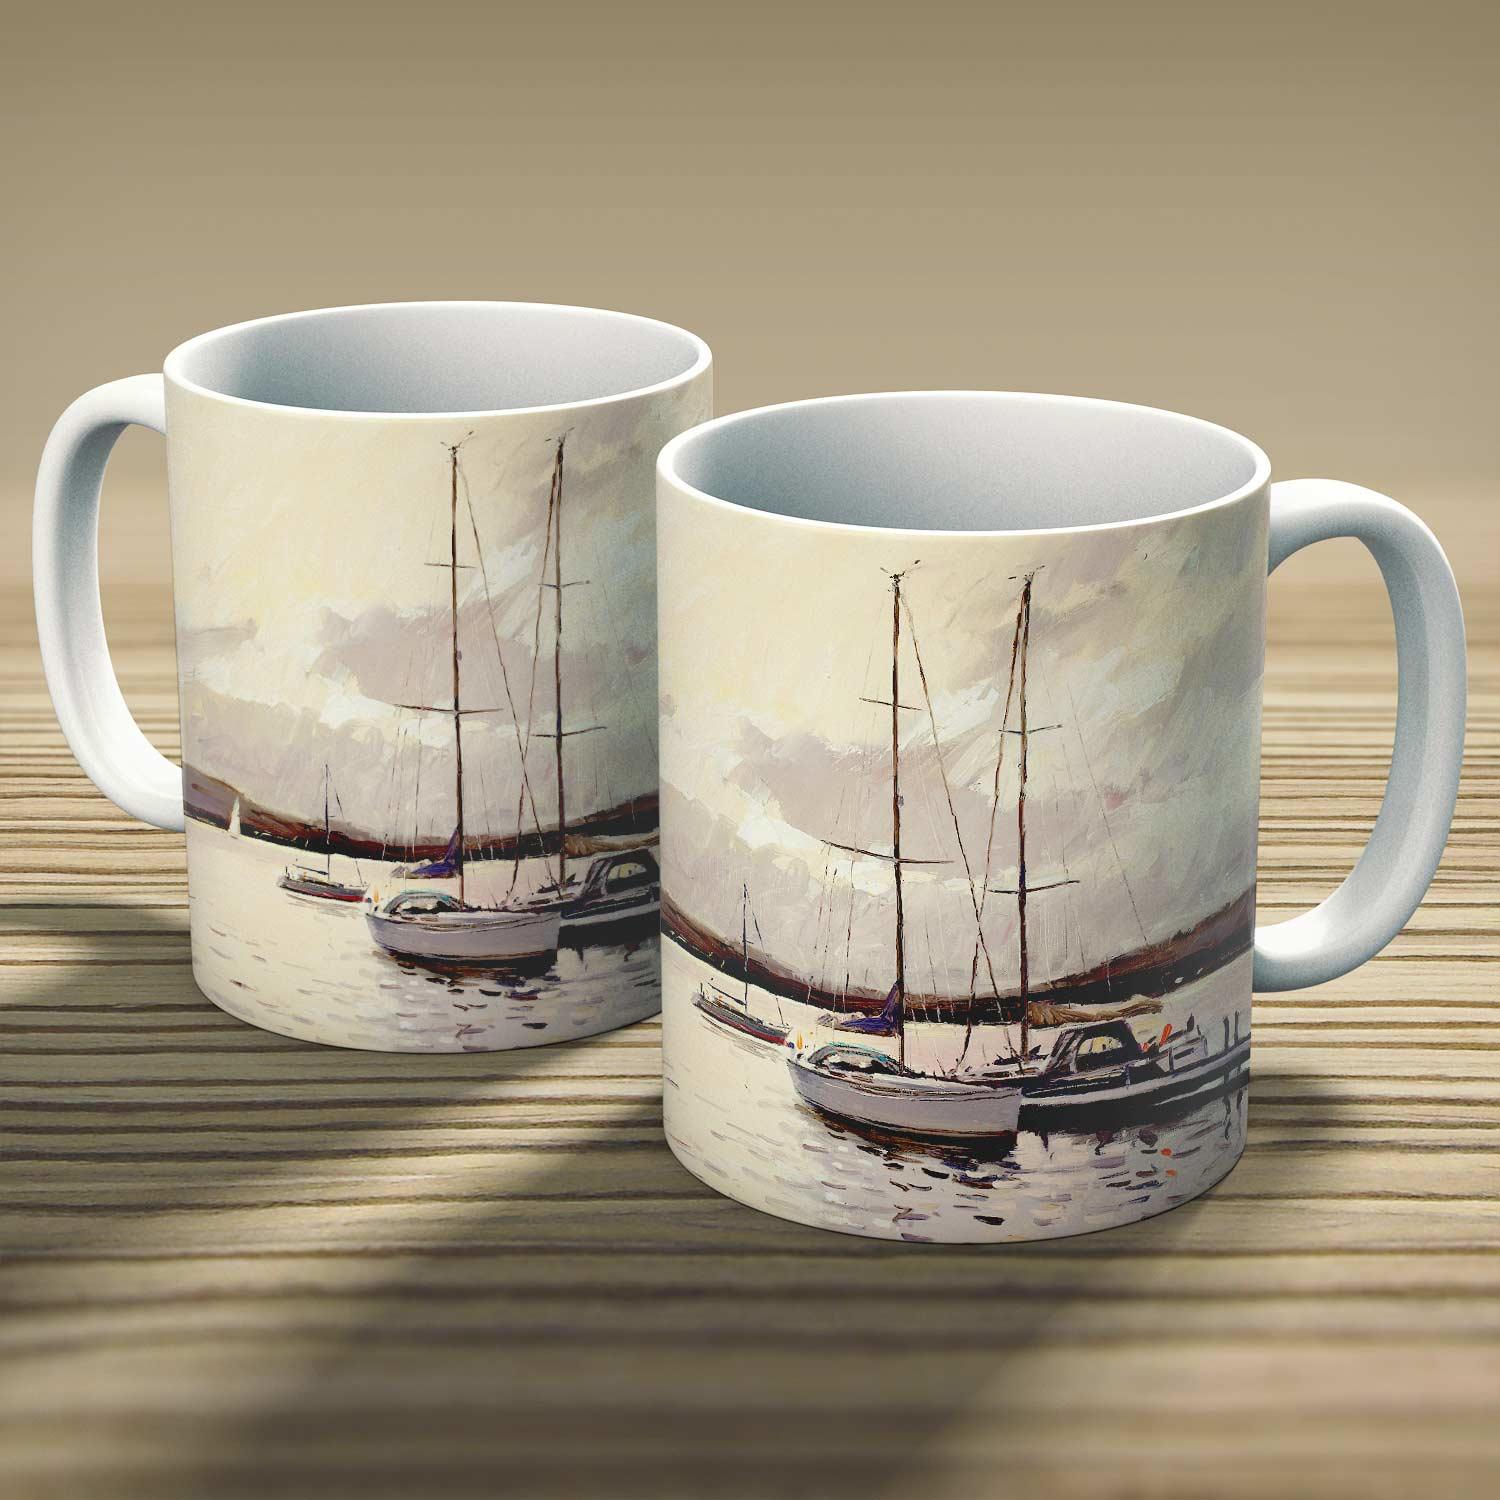 Tied Up Mug from an original painting by artist Robert Kelsey